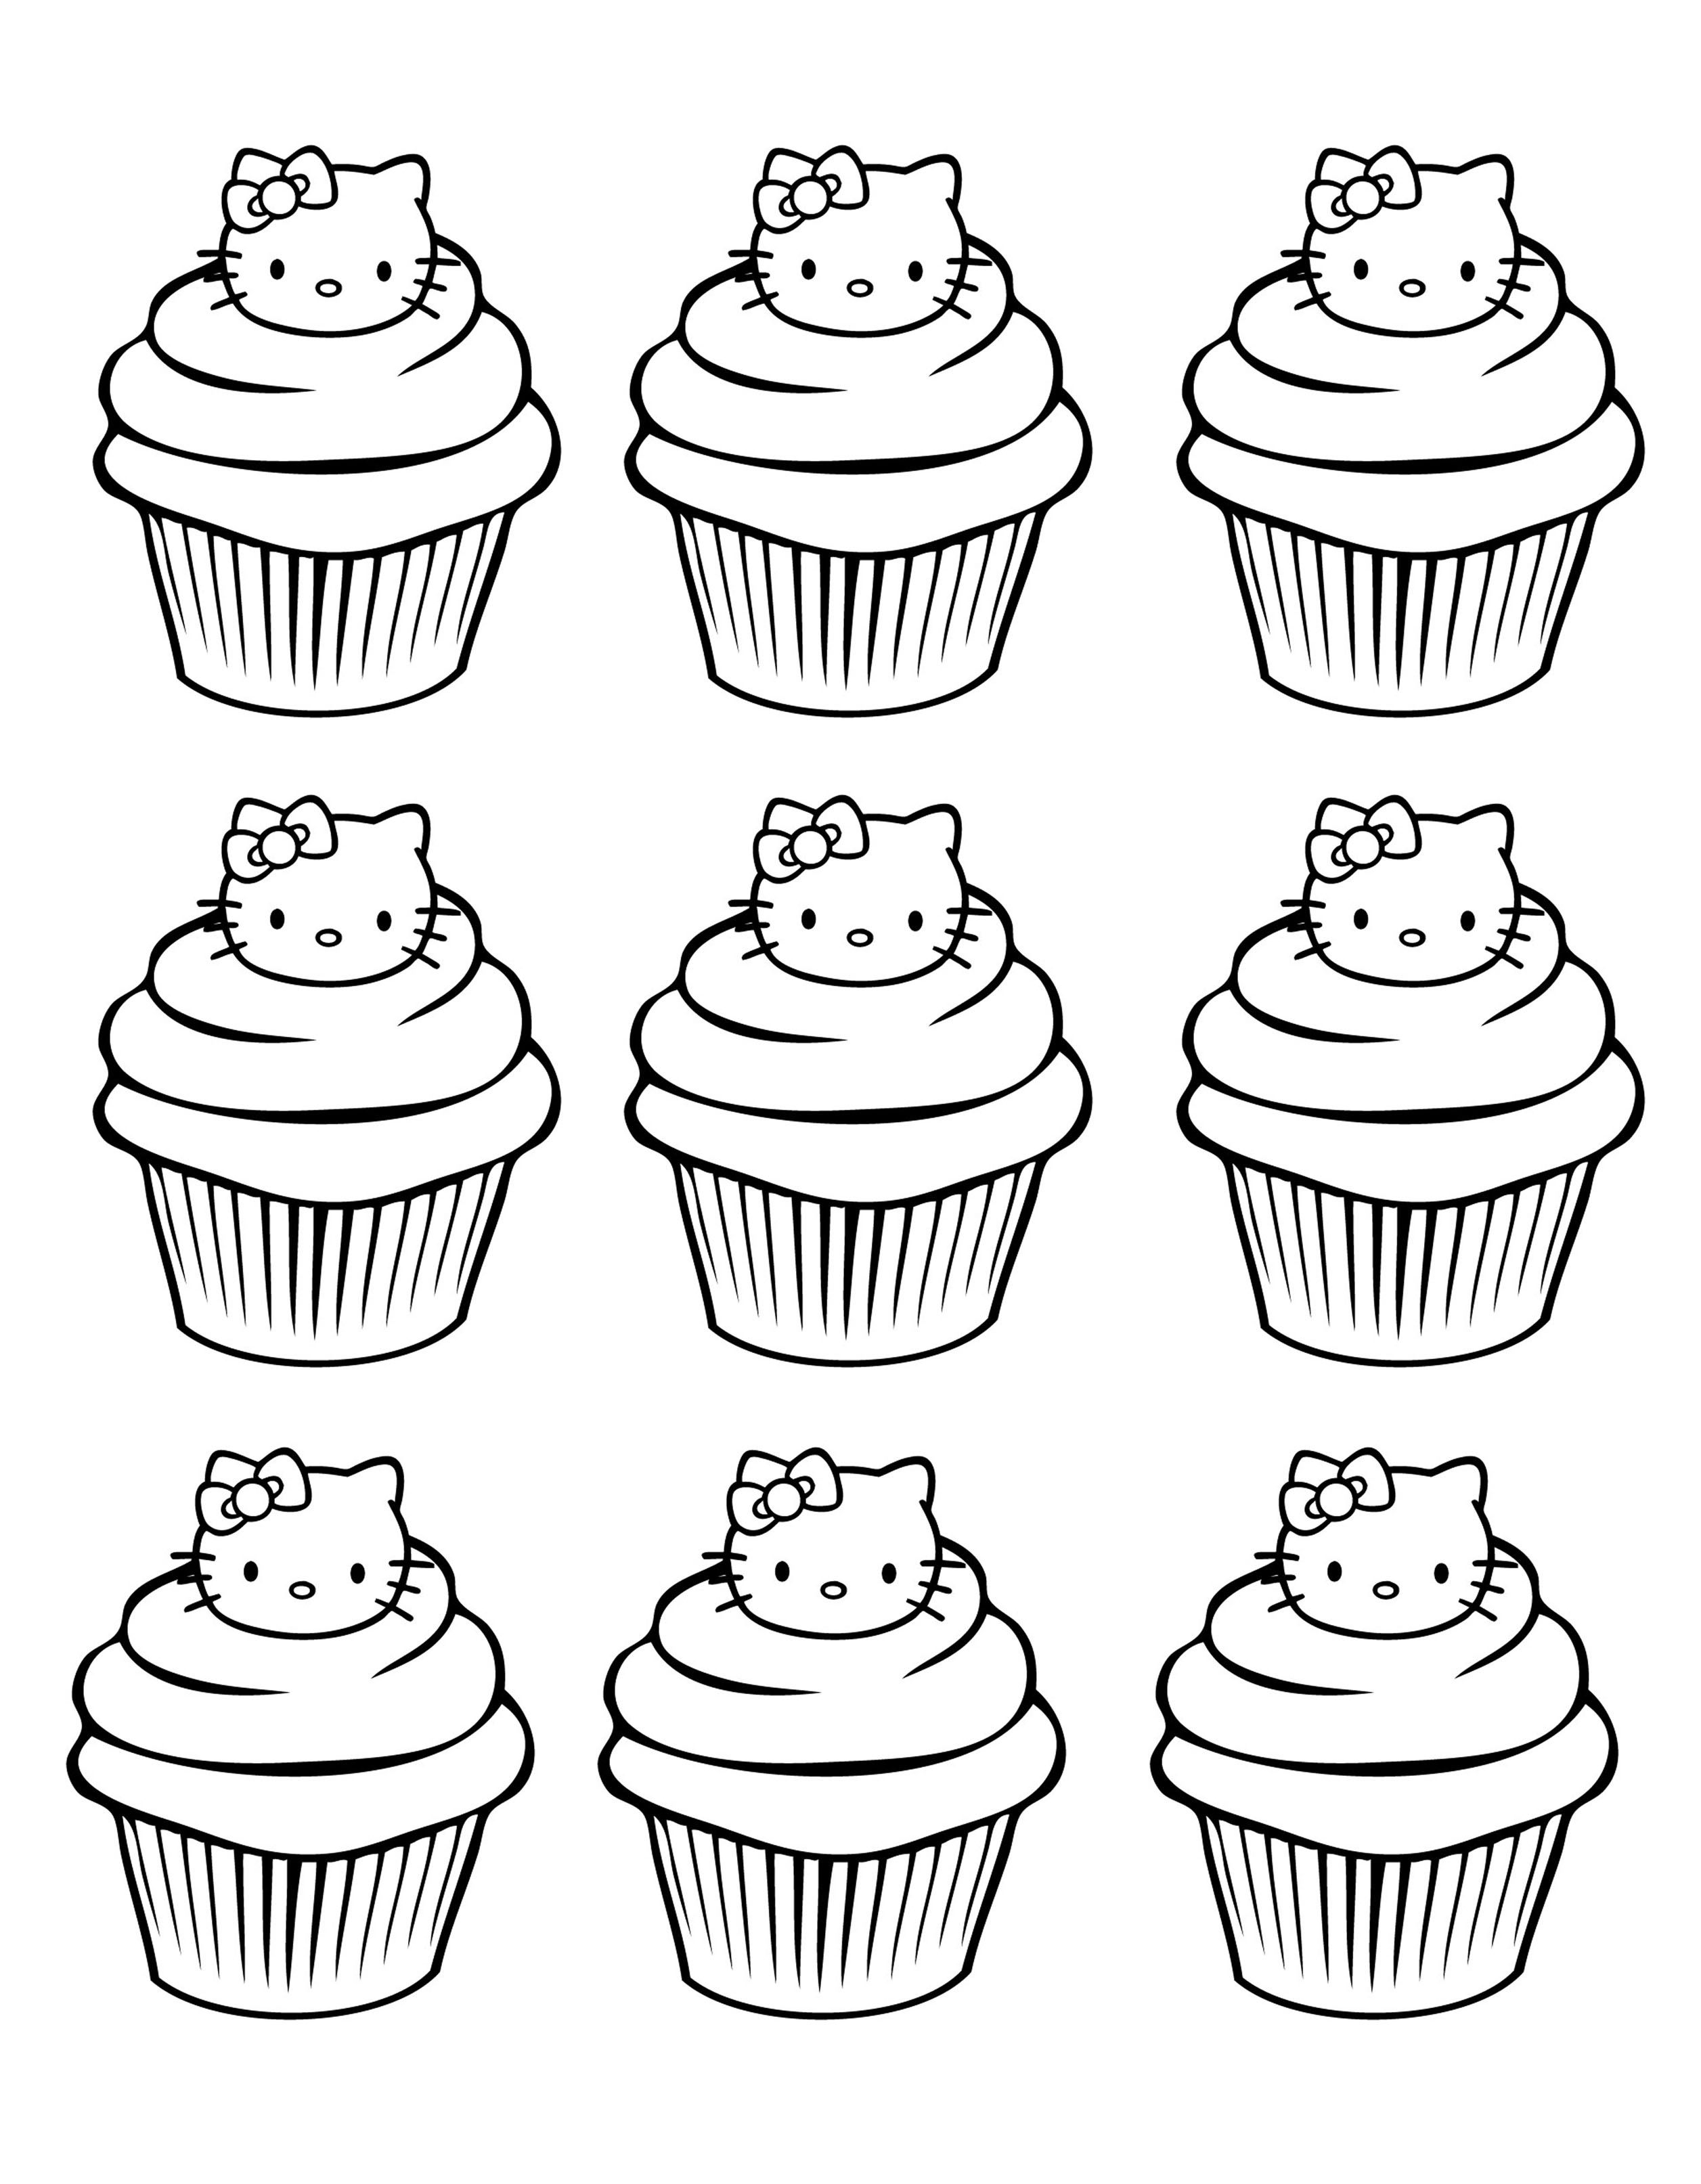 Cup Cake - Coloring Pages for adults : coloring-cupcakes-hello ...